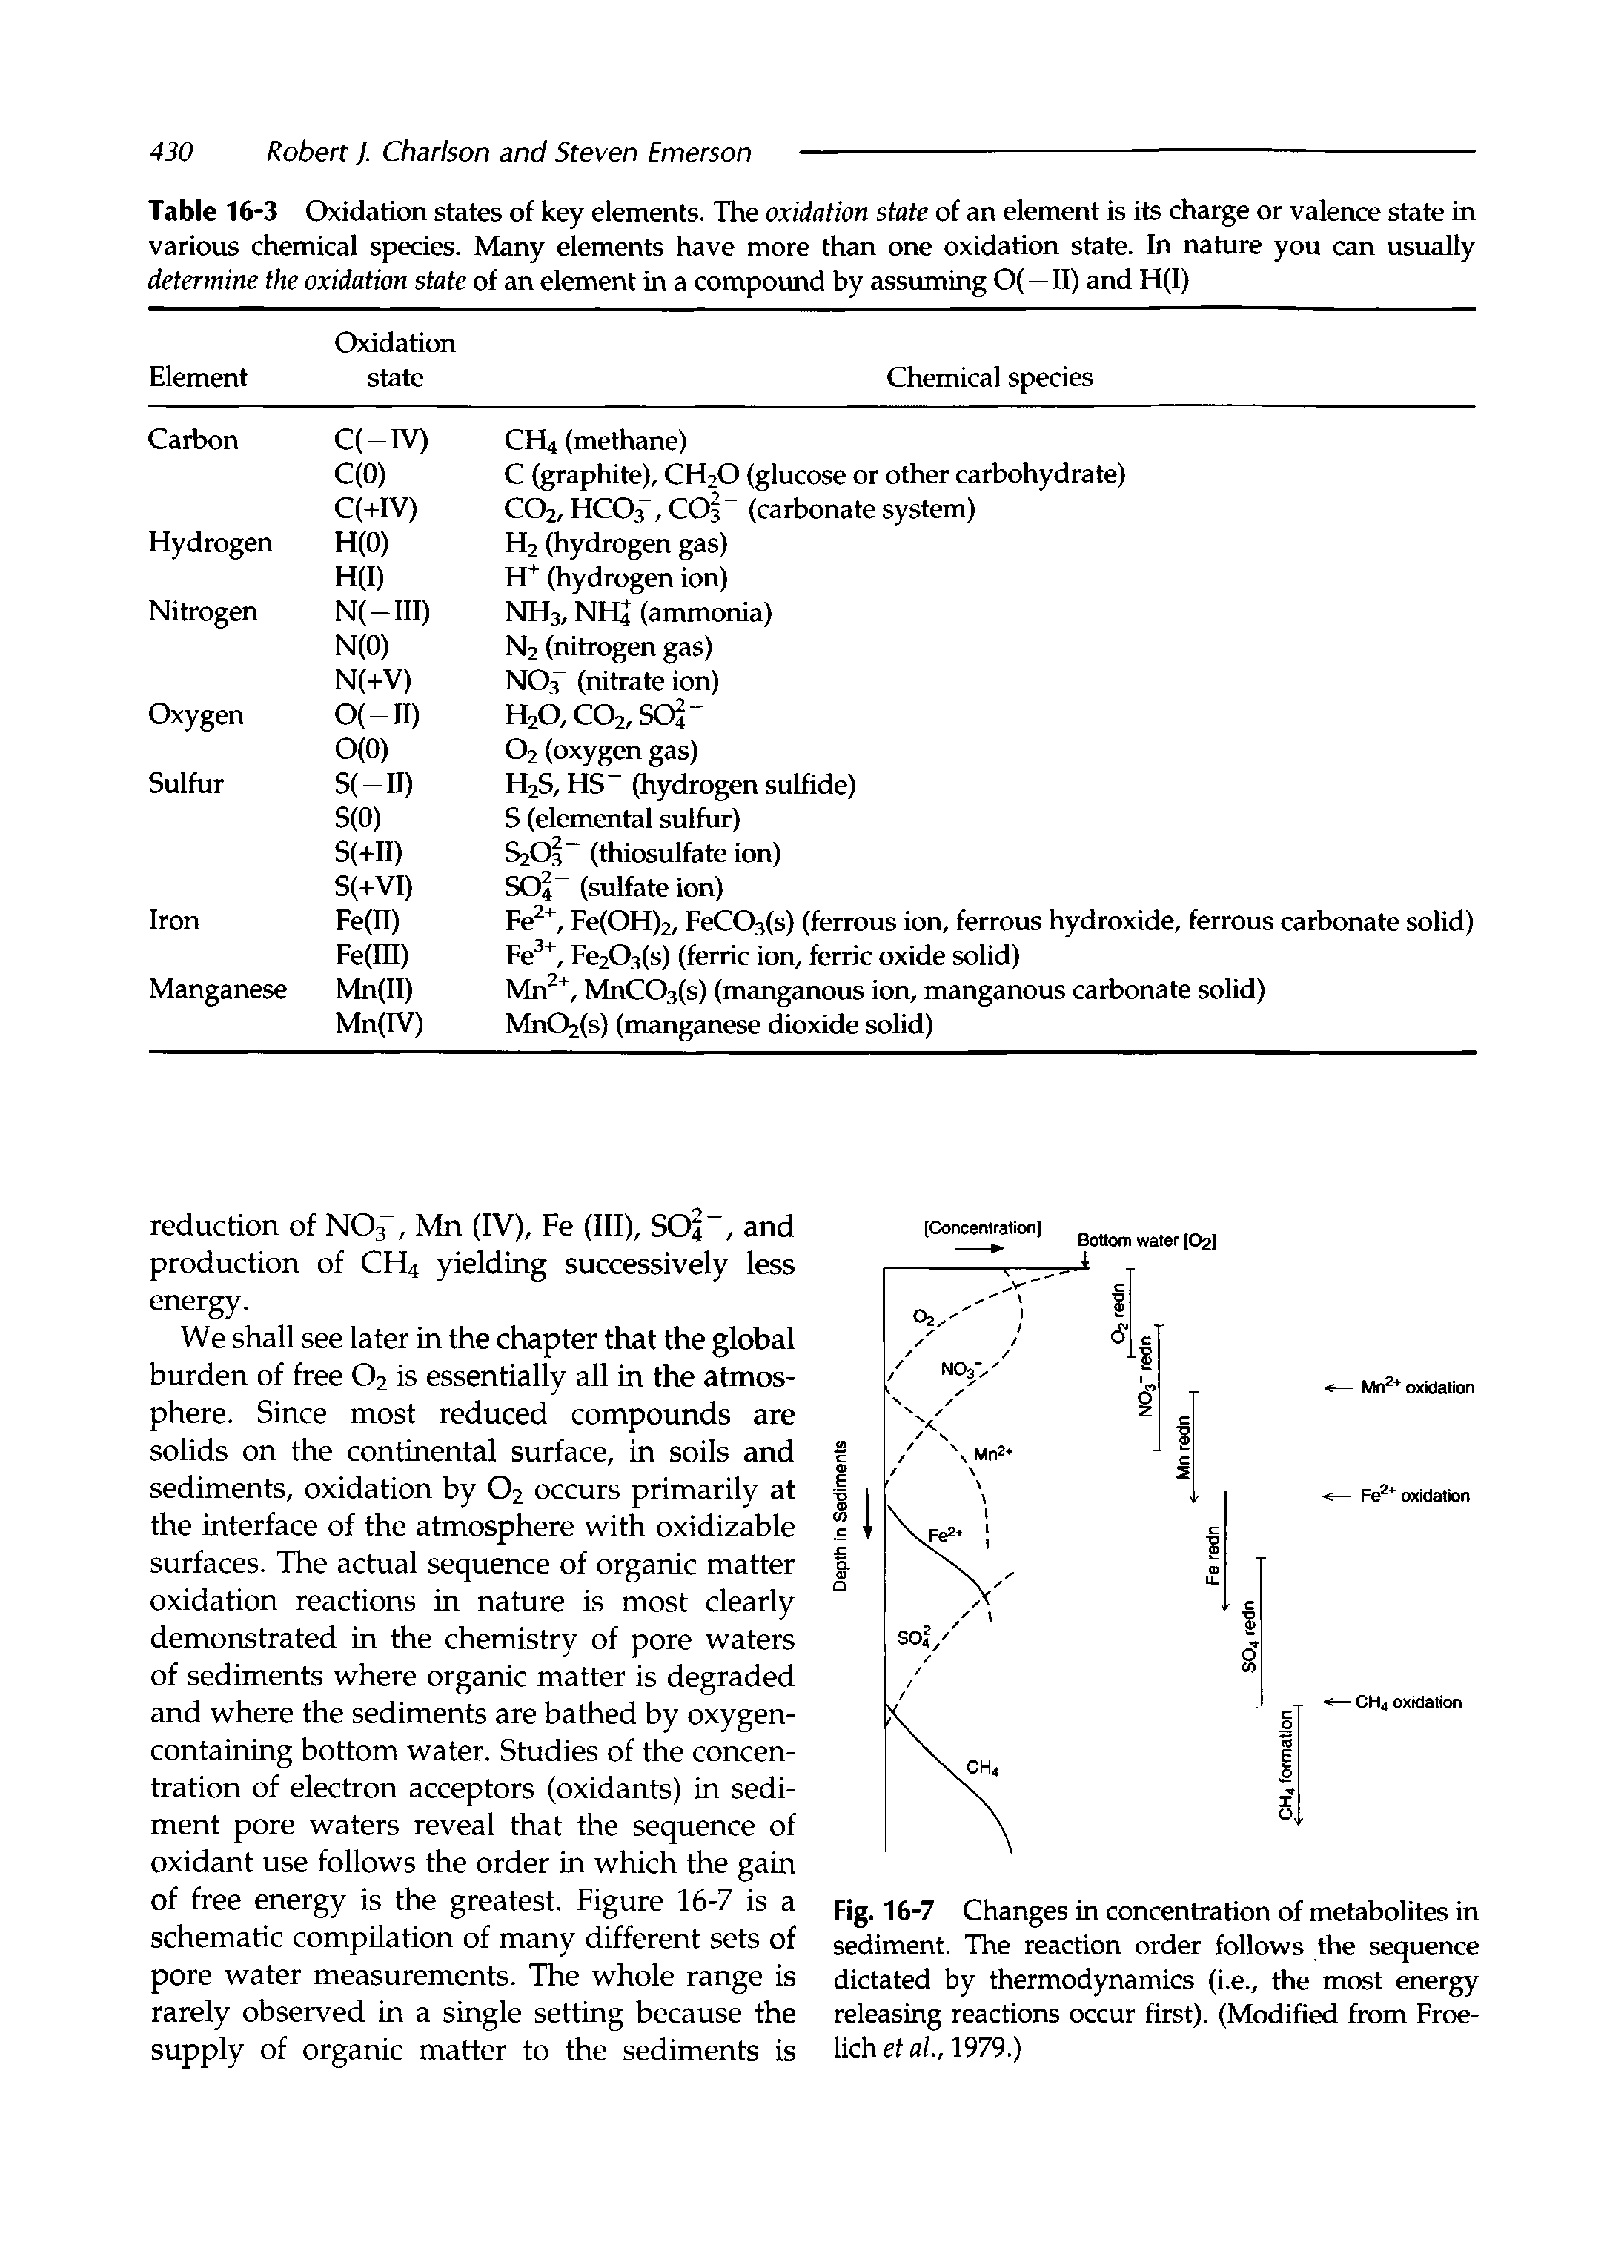 Table 16-3 Oxidation states of key elements. The oxidation state of an element is its charge or valence state in various chemical species. Many elements have more than one oxidation state. In nature you can usually determine the oxidation state of an element in a compound by assuming 0(—II) and H(I)...